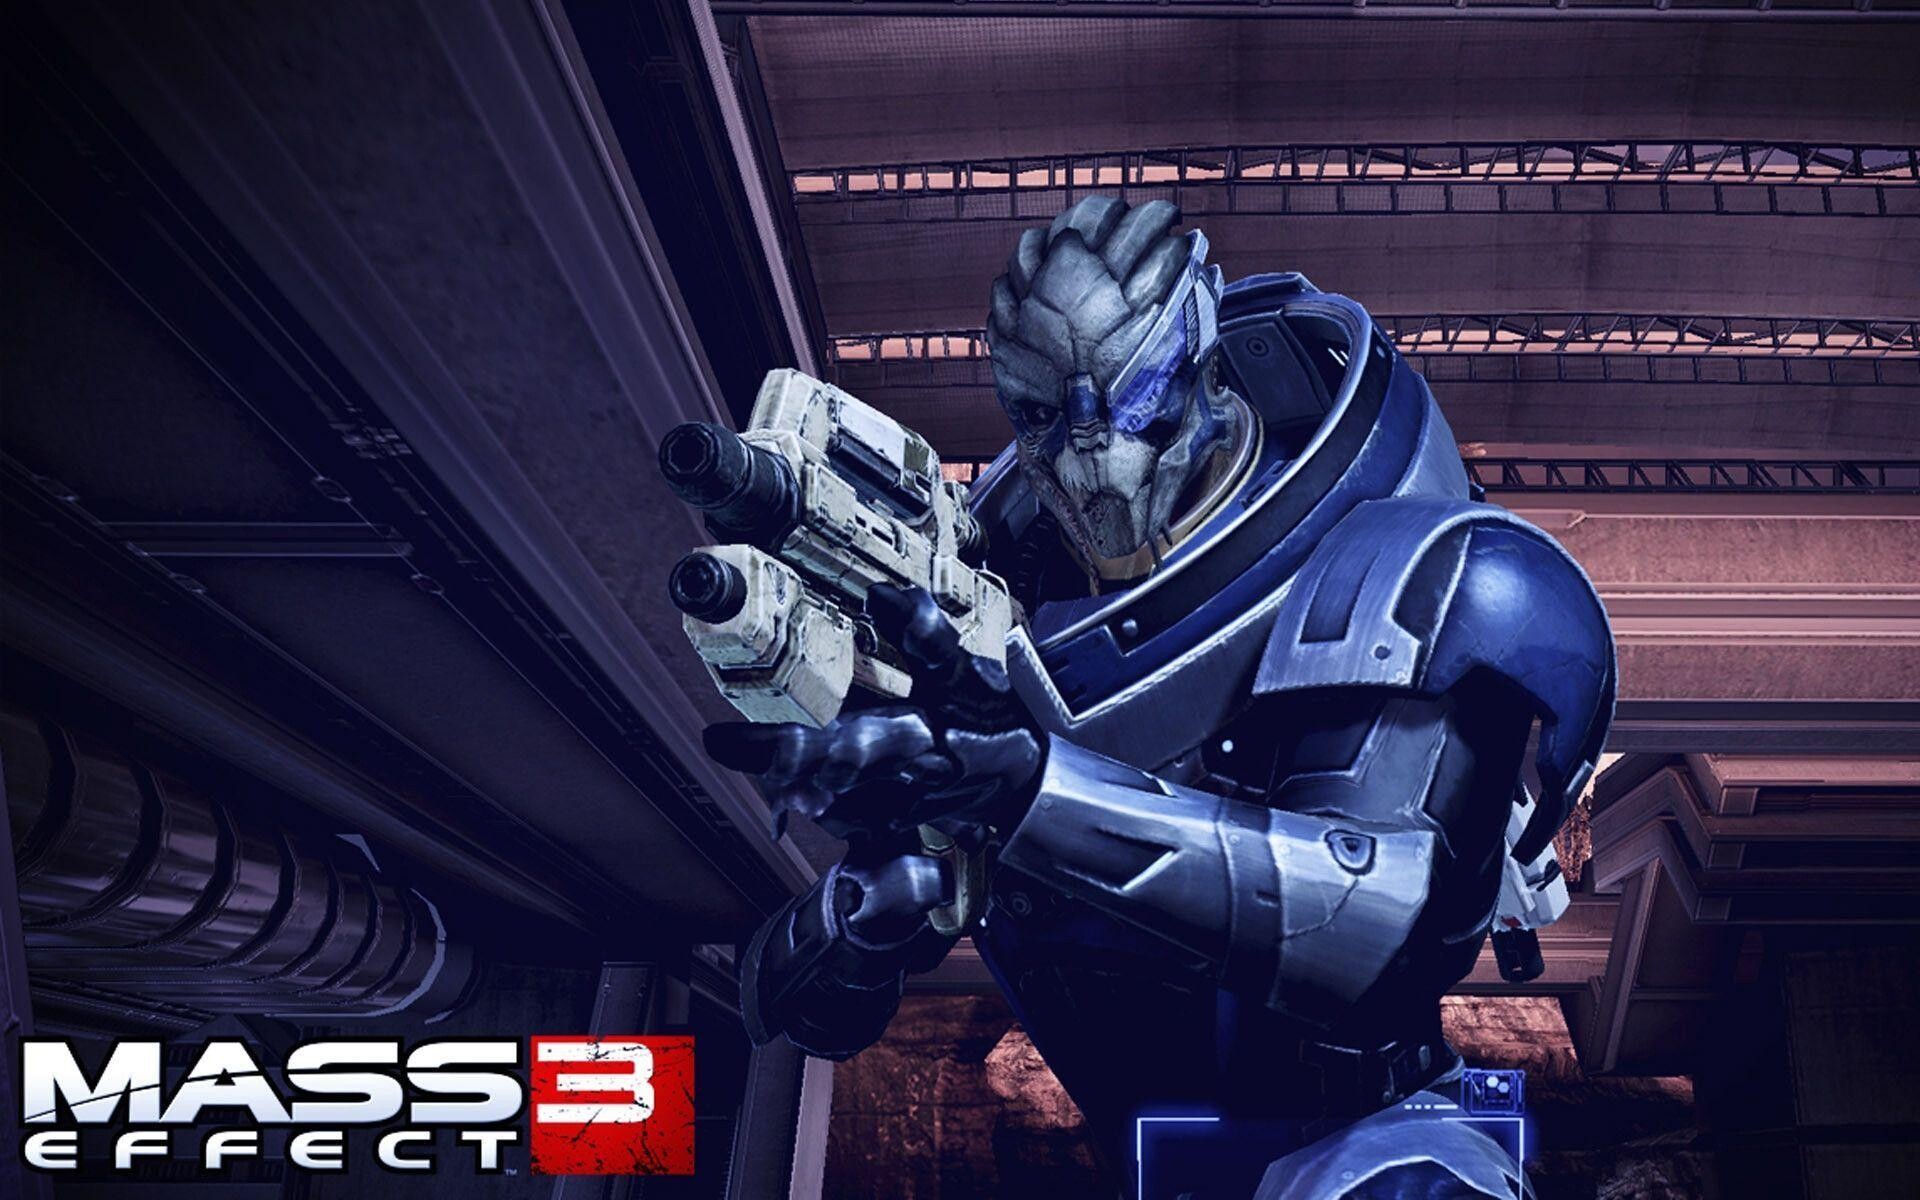 Garrus Vakarian: Archangel equipped with M-96 Mattock, Mass Effect 3 mission, An action role-playing video game. 1920x1200 HD Background.